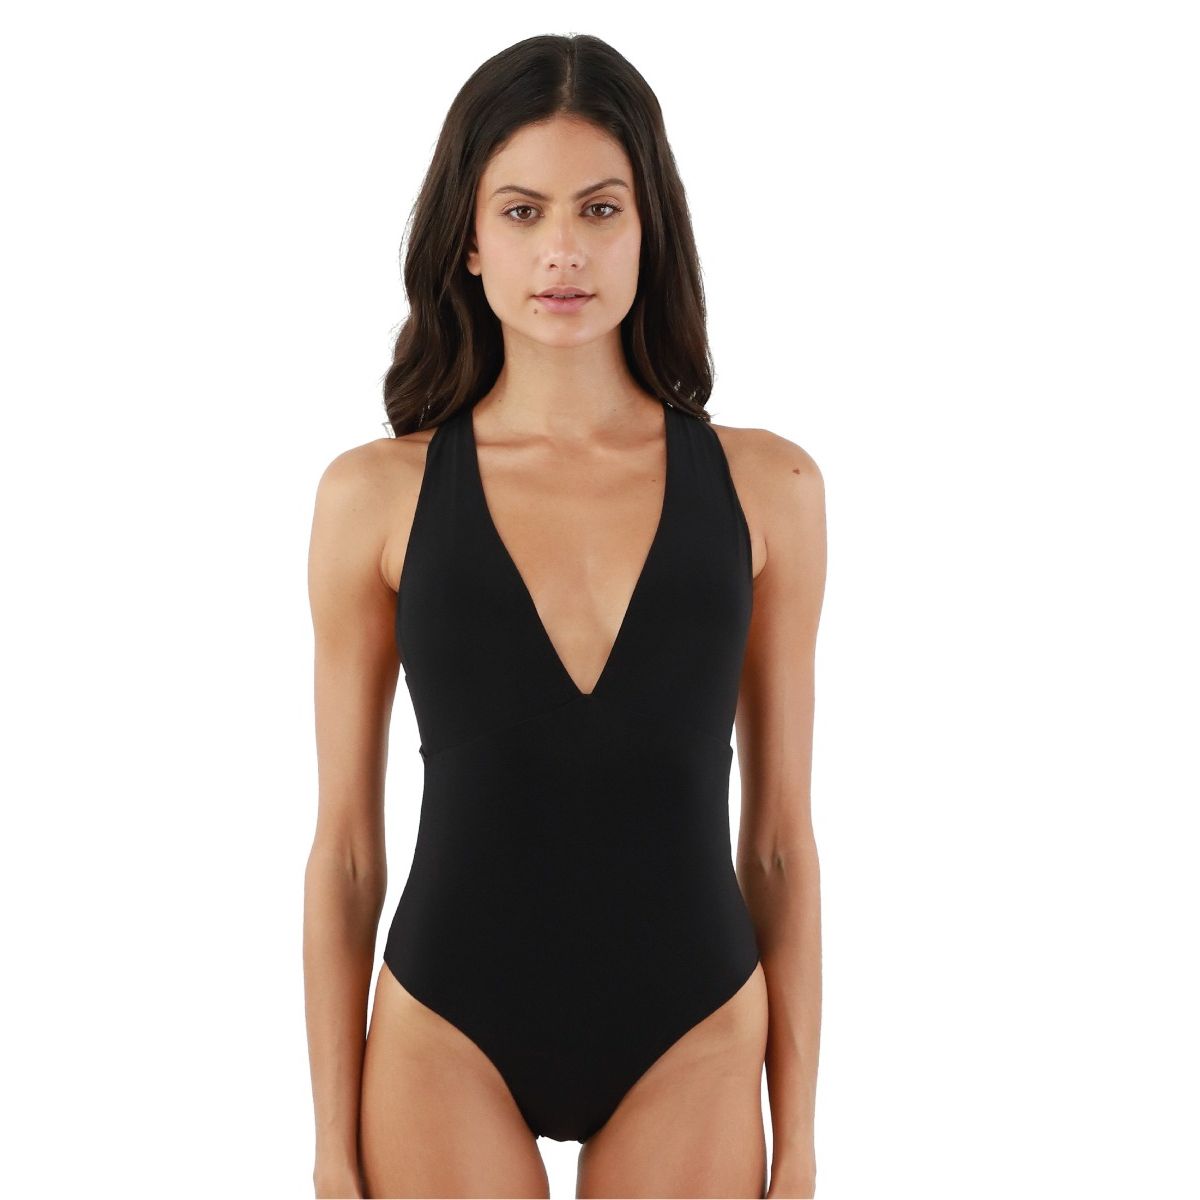 Plunging Black One Piece